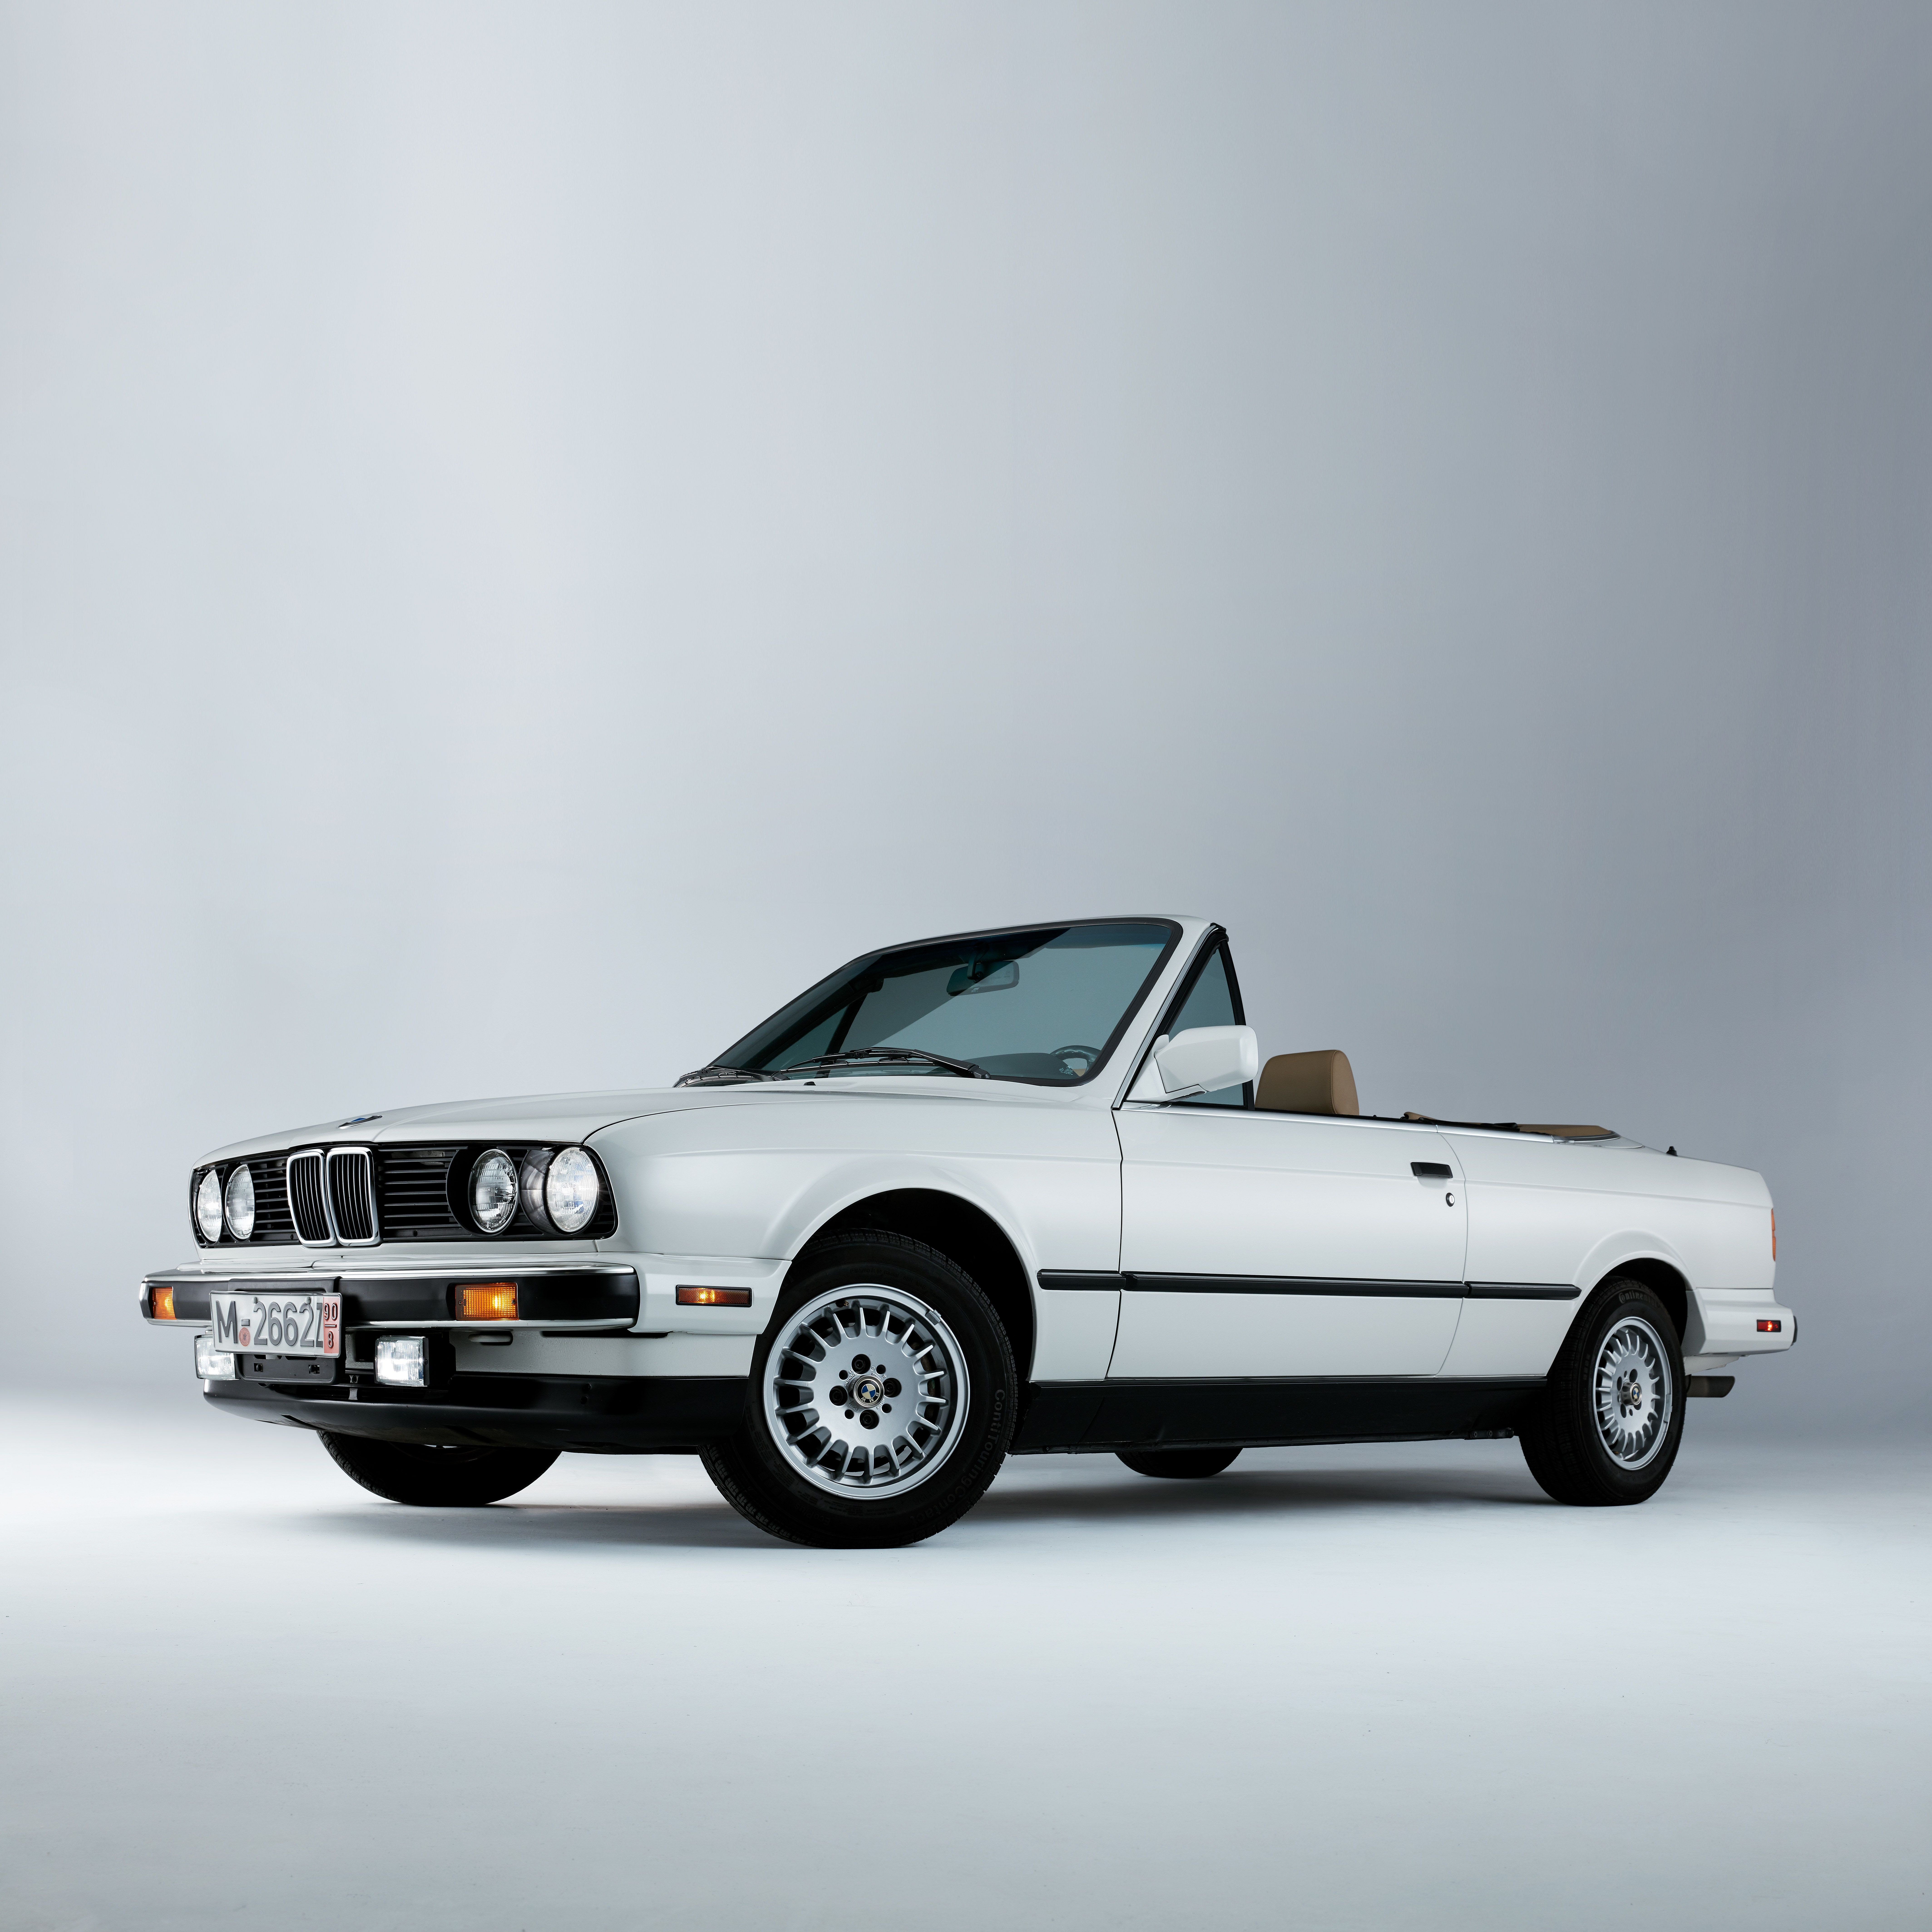 What To Buy: BMW 325i